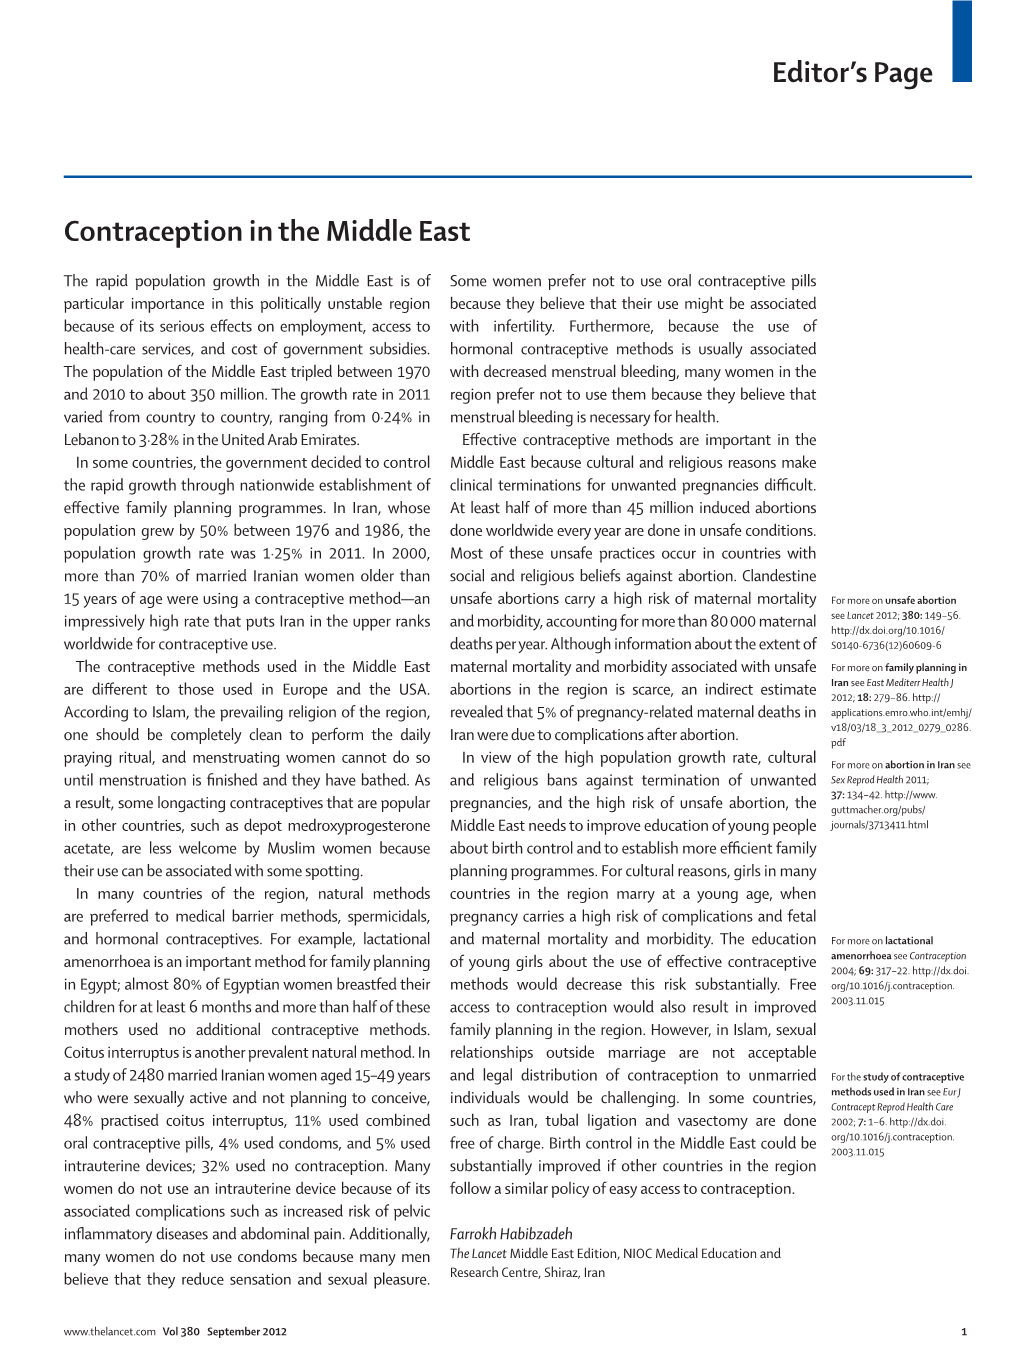 Contraception in the Middle East